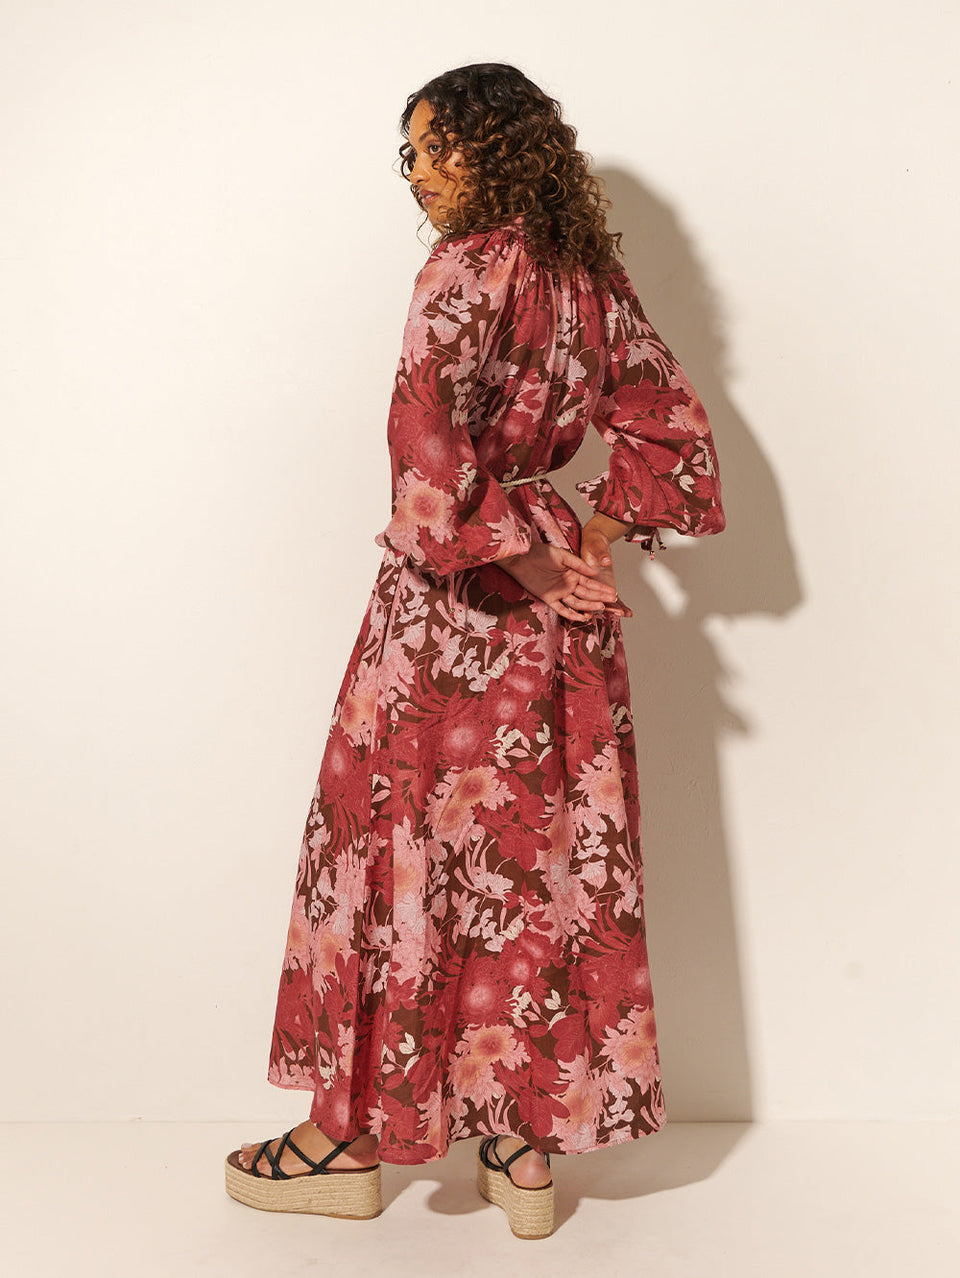 Back shot: Studio model wears KIVARI Hacienda Maxi Dress: A red, pink and brown floral dress with a shirred collar, button-through front, waist ties and full-length sleeves, crafted from sustainable LENZING Viscose Crepe.